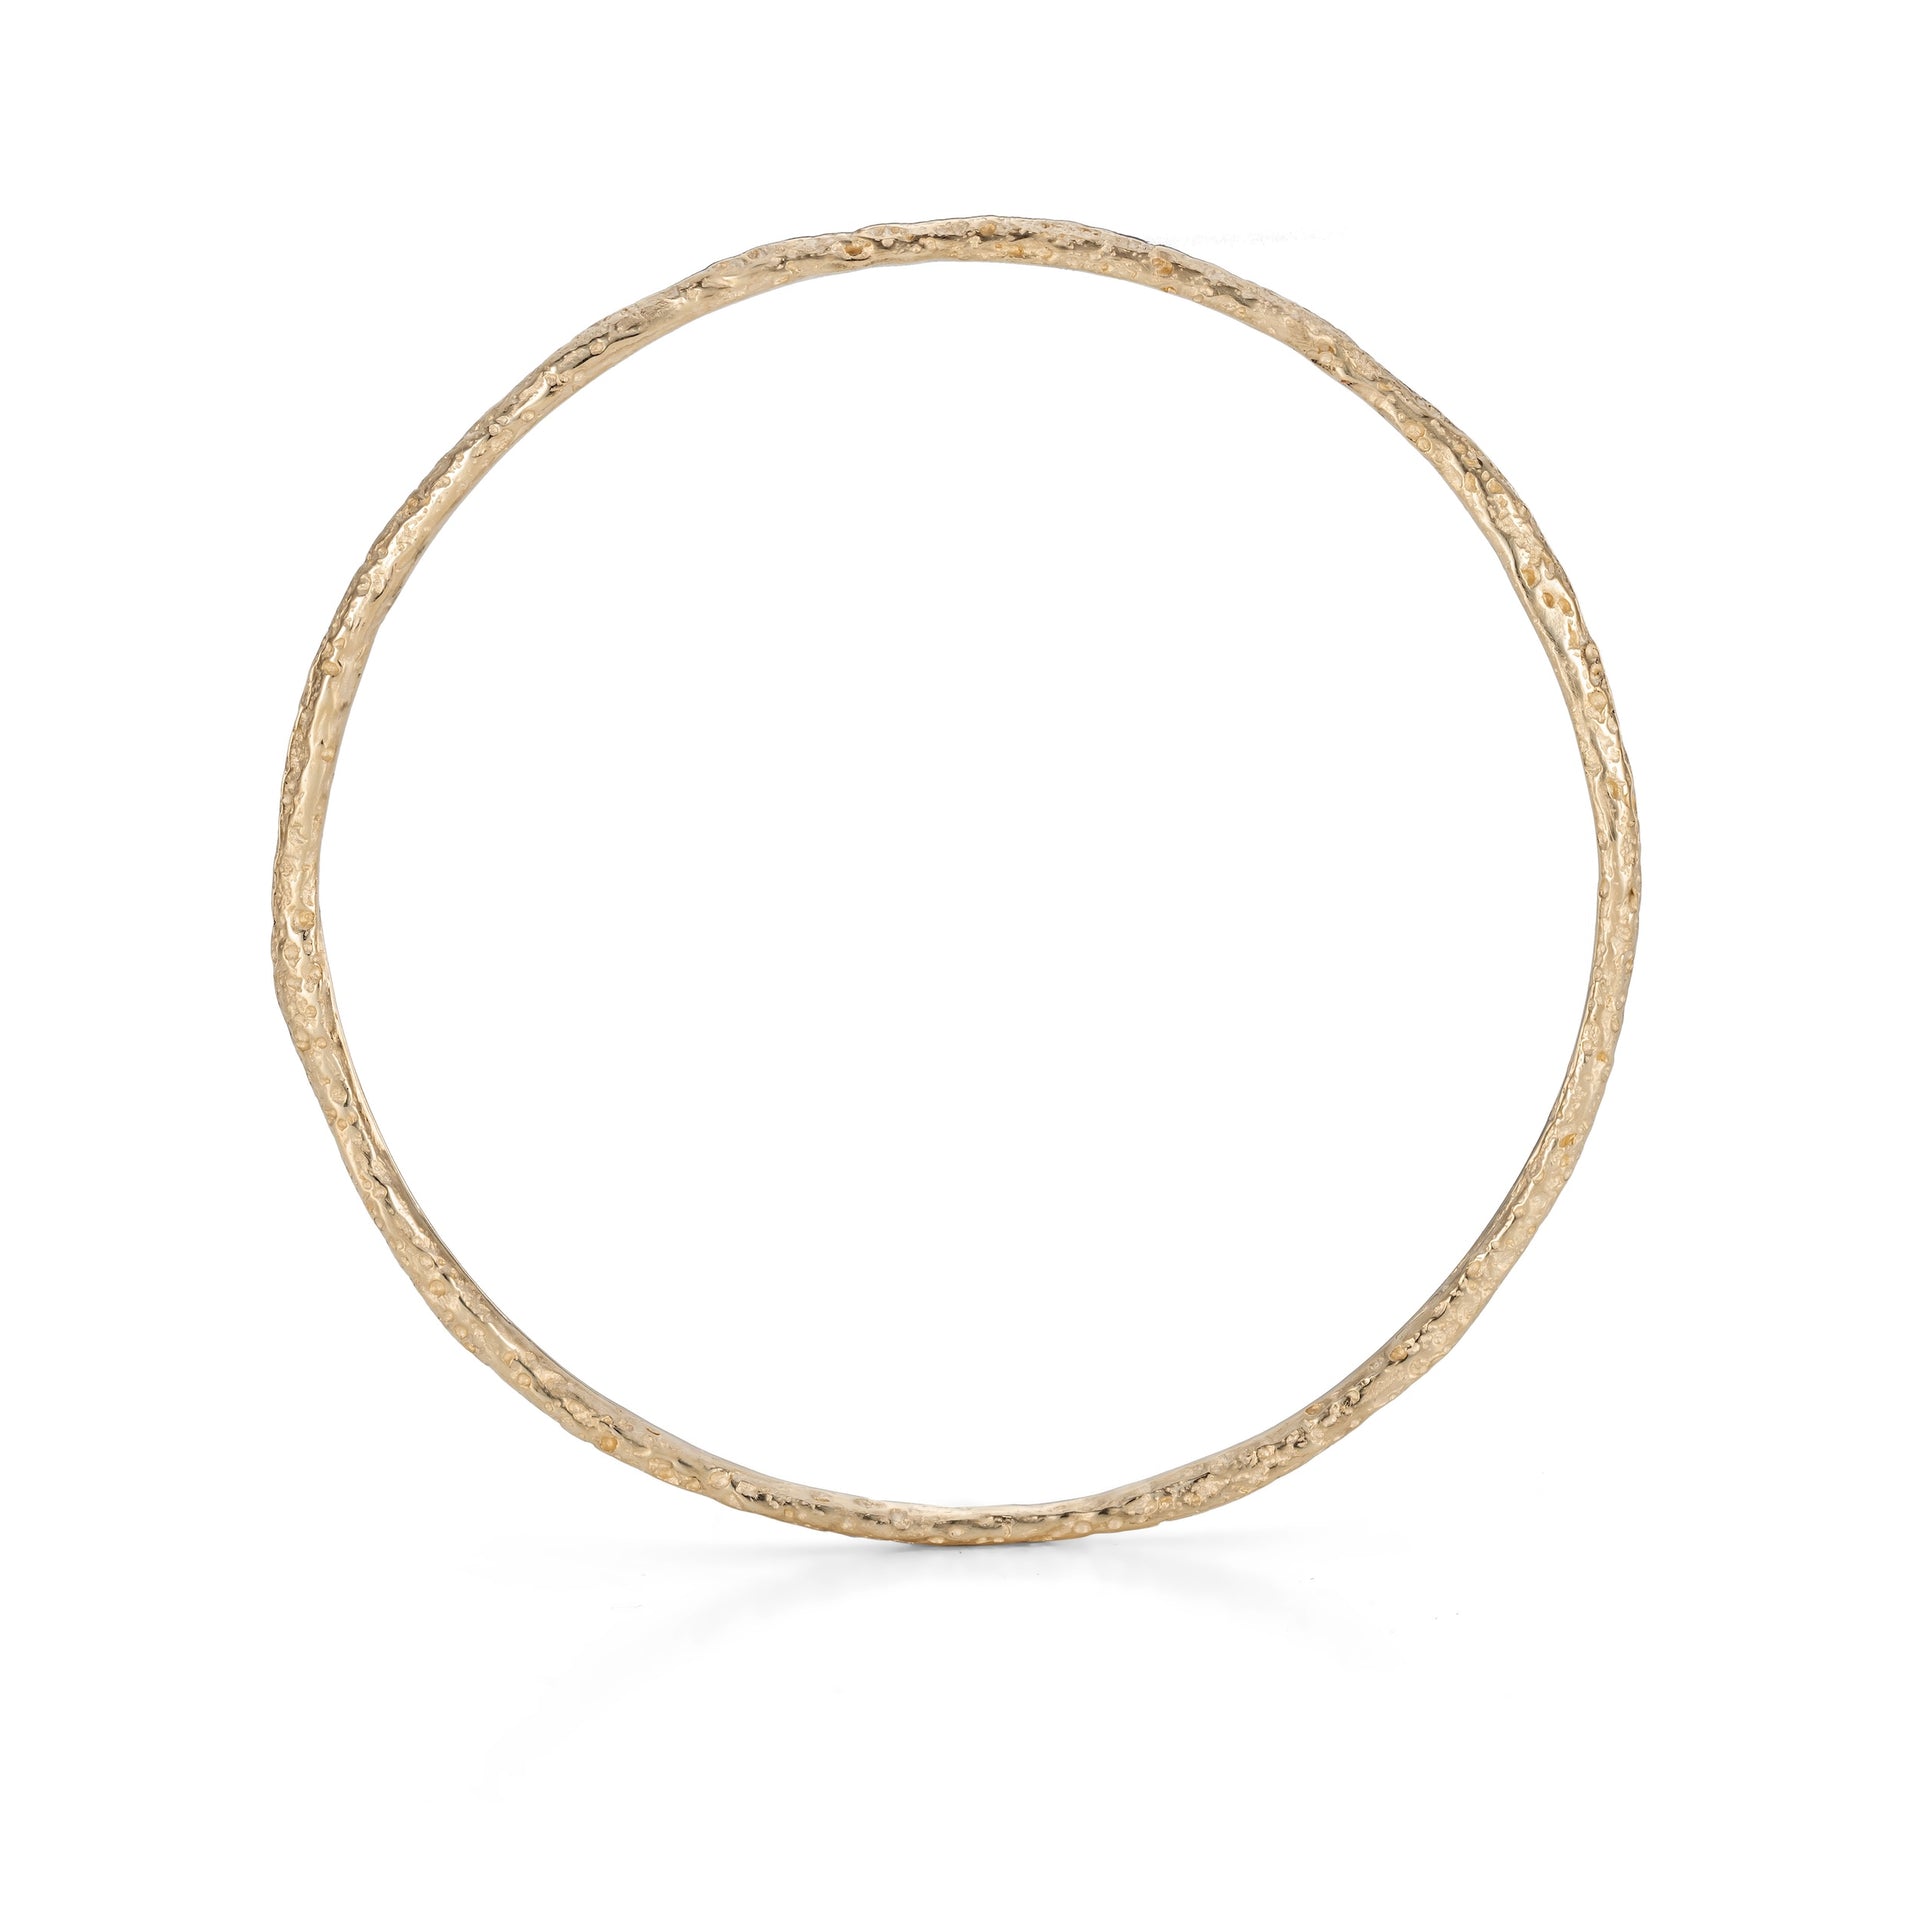 Rounded Urchin Bangle 9ct Gold